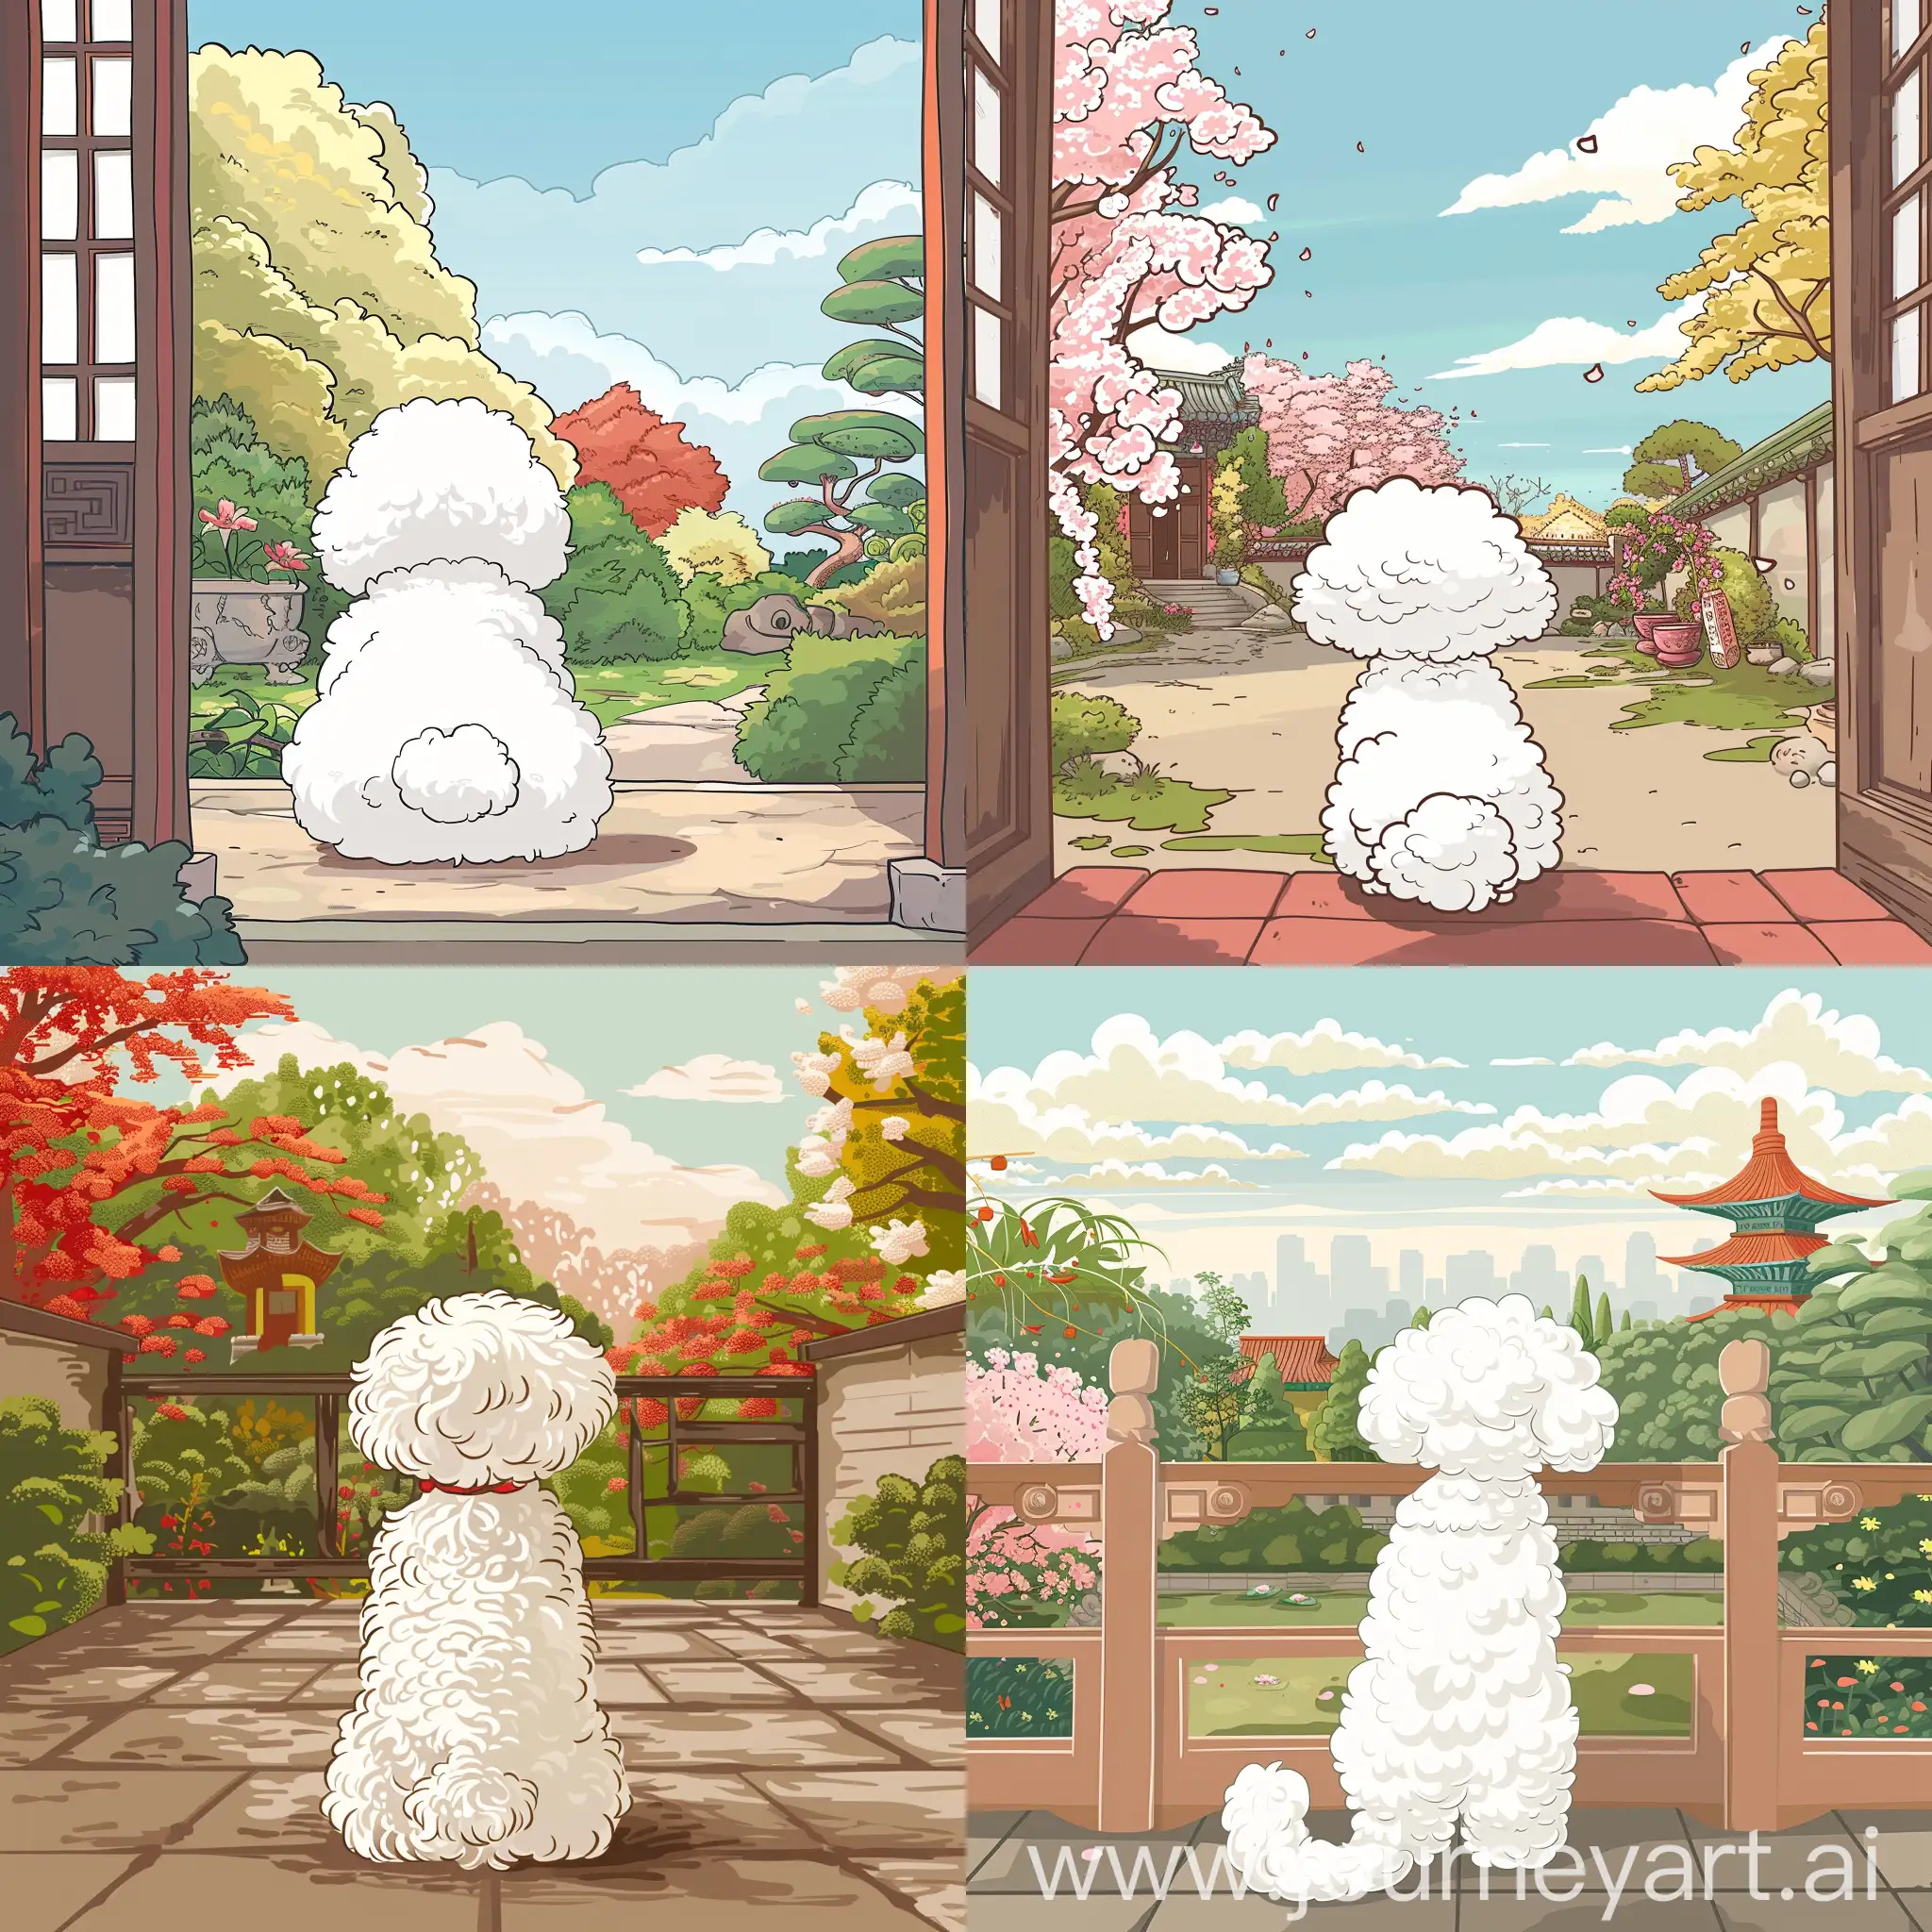 Charming-White-Bichon-Frise-Enjoying-a-Cartoon-Spring-Day-in-a-Southern-Chinese-Garden